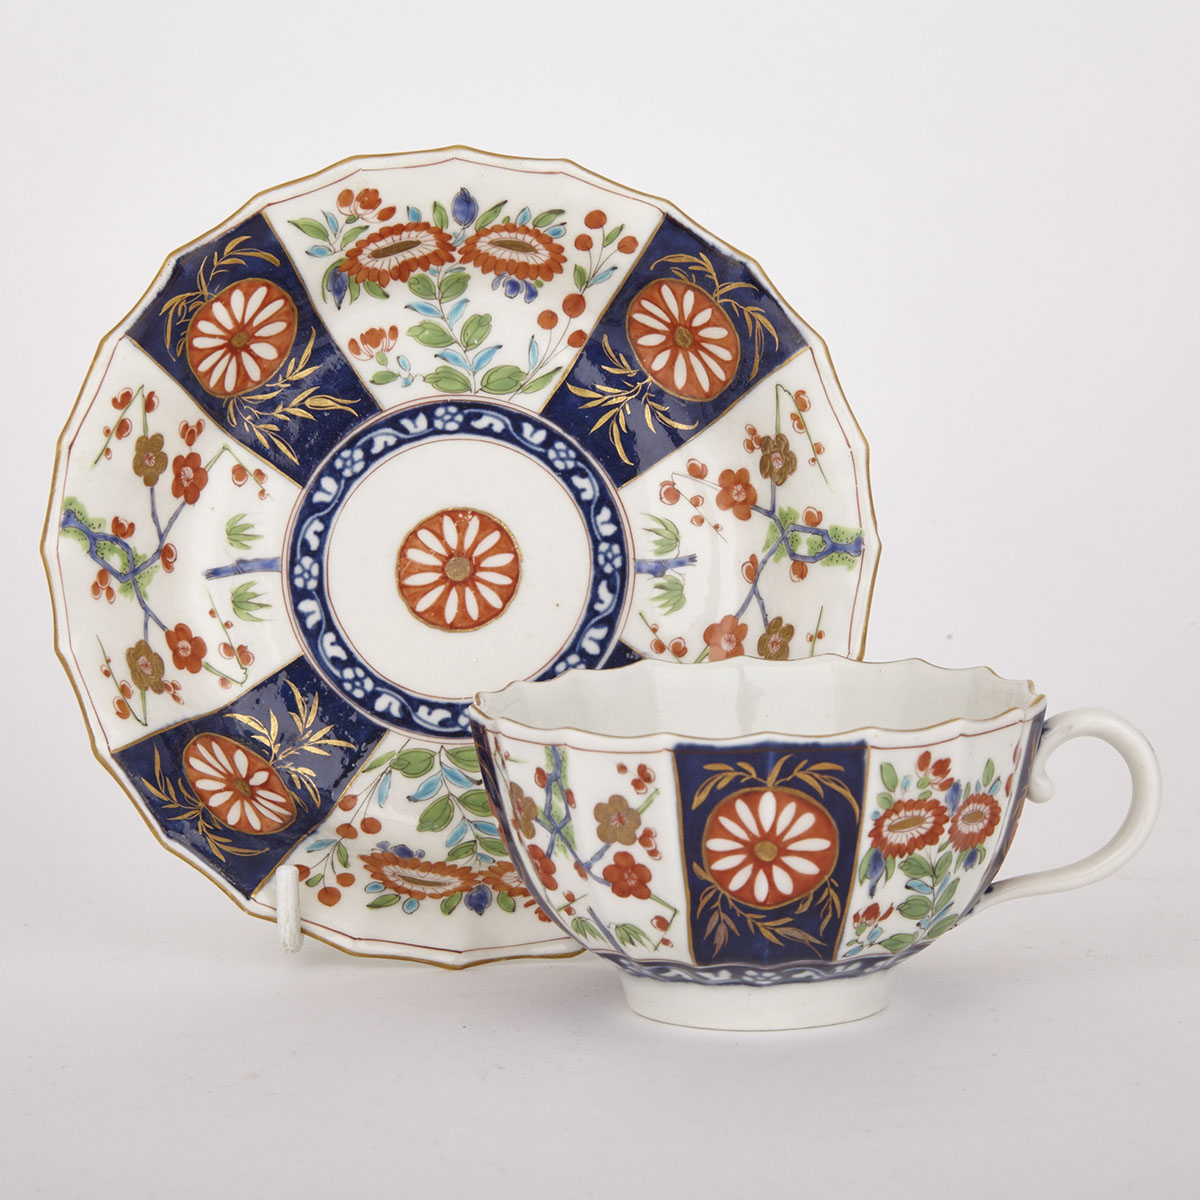 Worcester ‘Queen’s’ Japan Pattern Cup and Saucer, c.1770